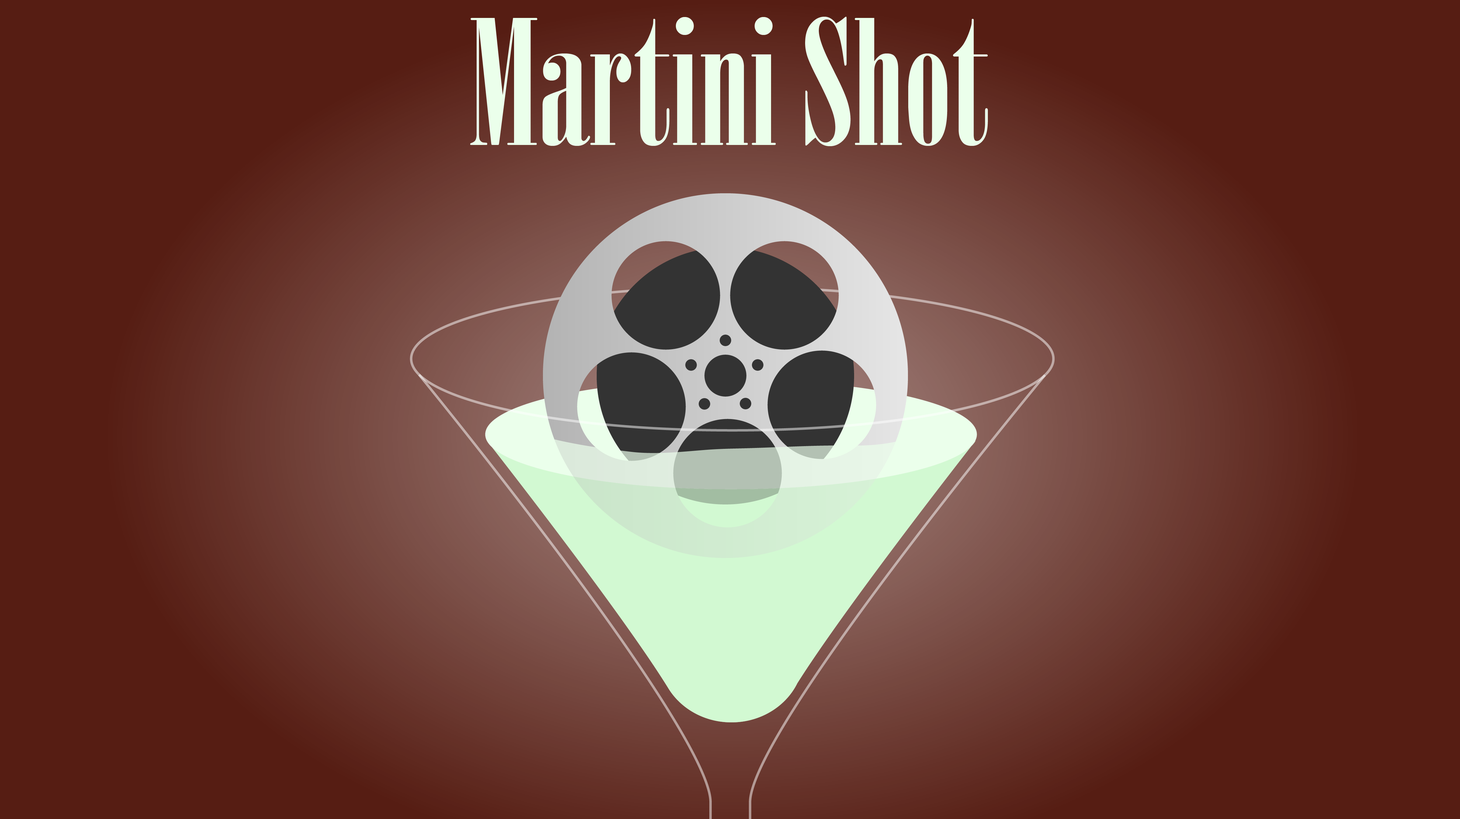 This is Rob Long and on today’s Martini Shot I have a super groovy singer friend who tells me that the reason I don’t like the sound of my own voice is because I don’t know how to breathe, which is weird because I’m breathing right now, but it…